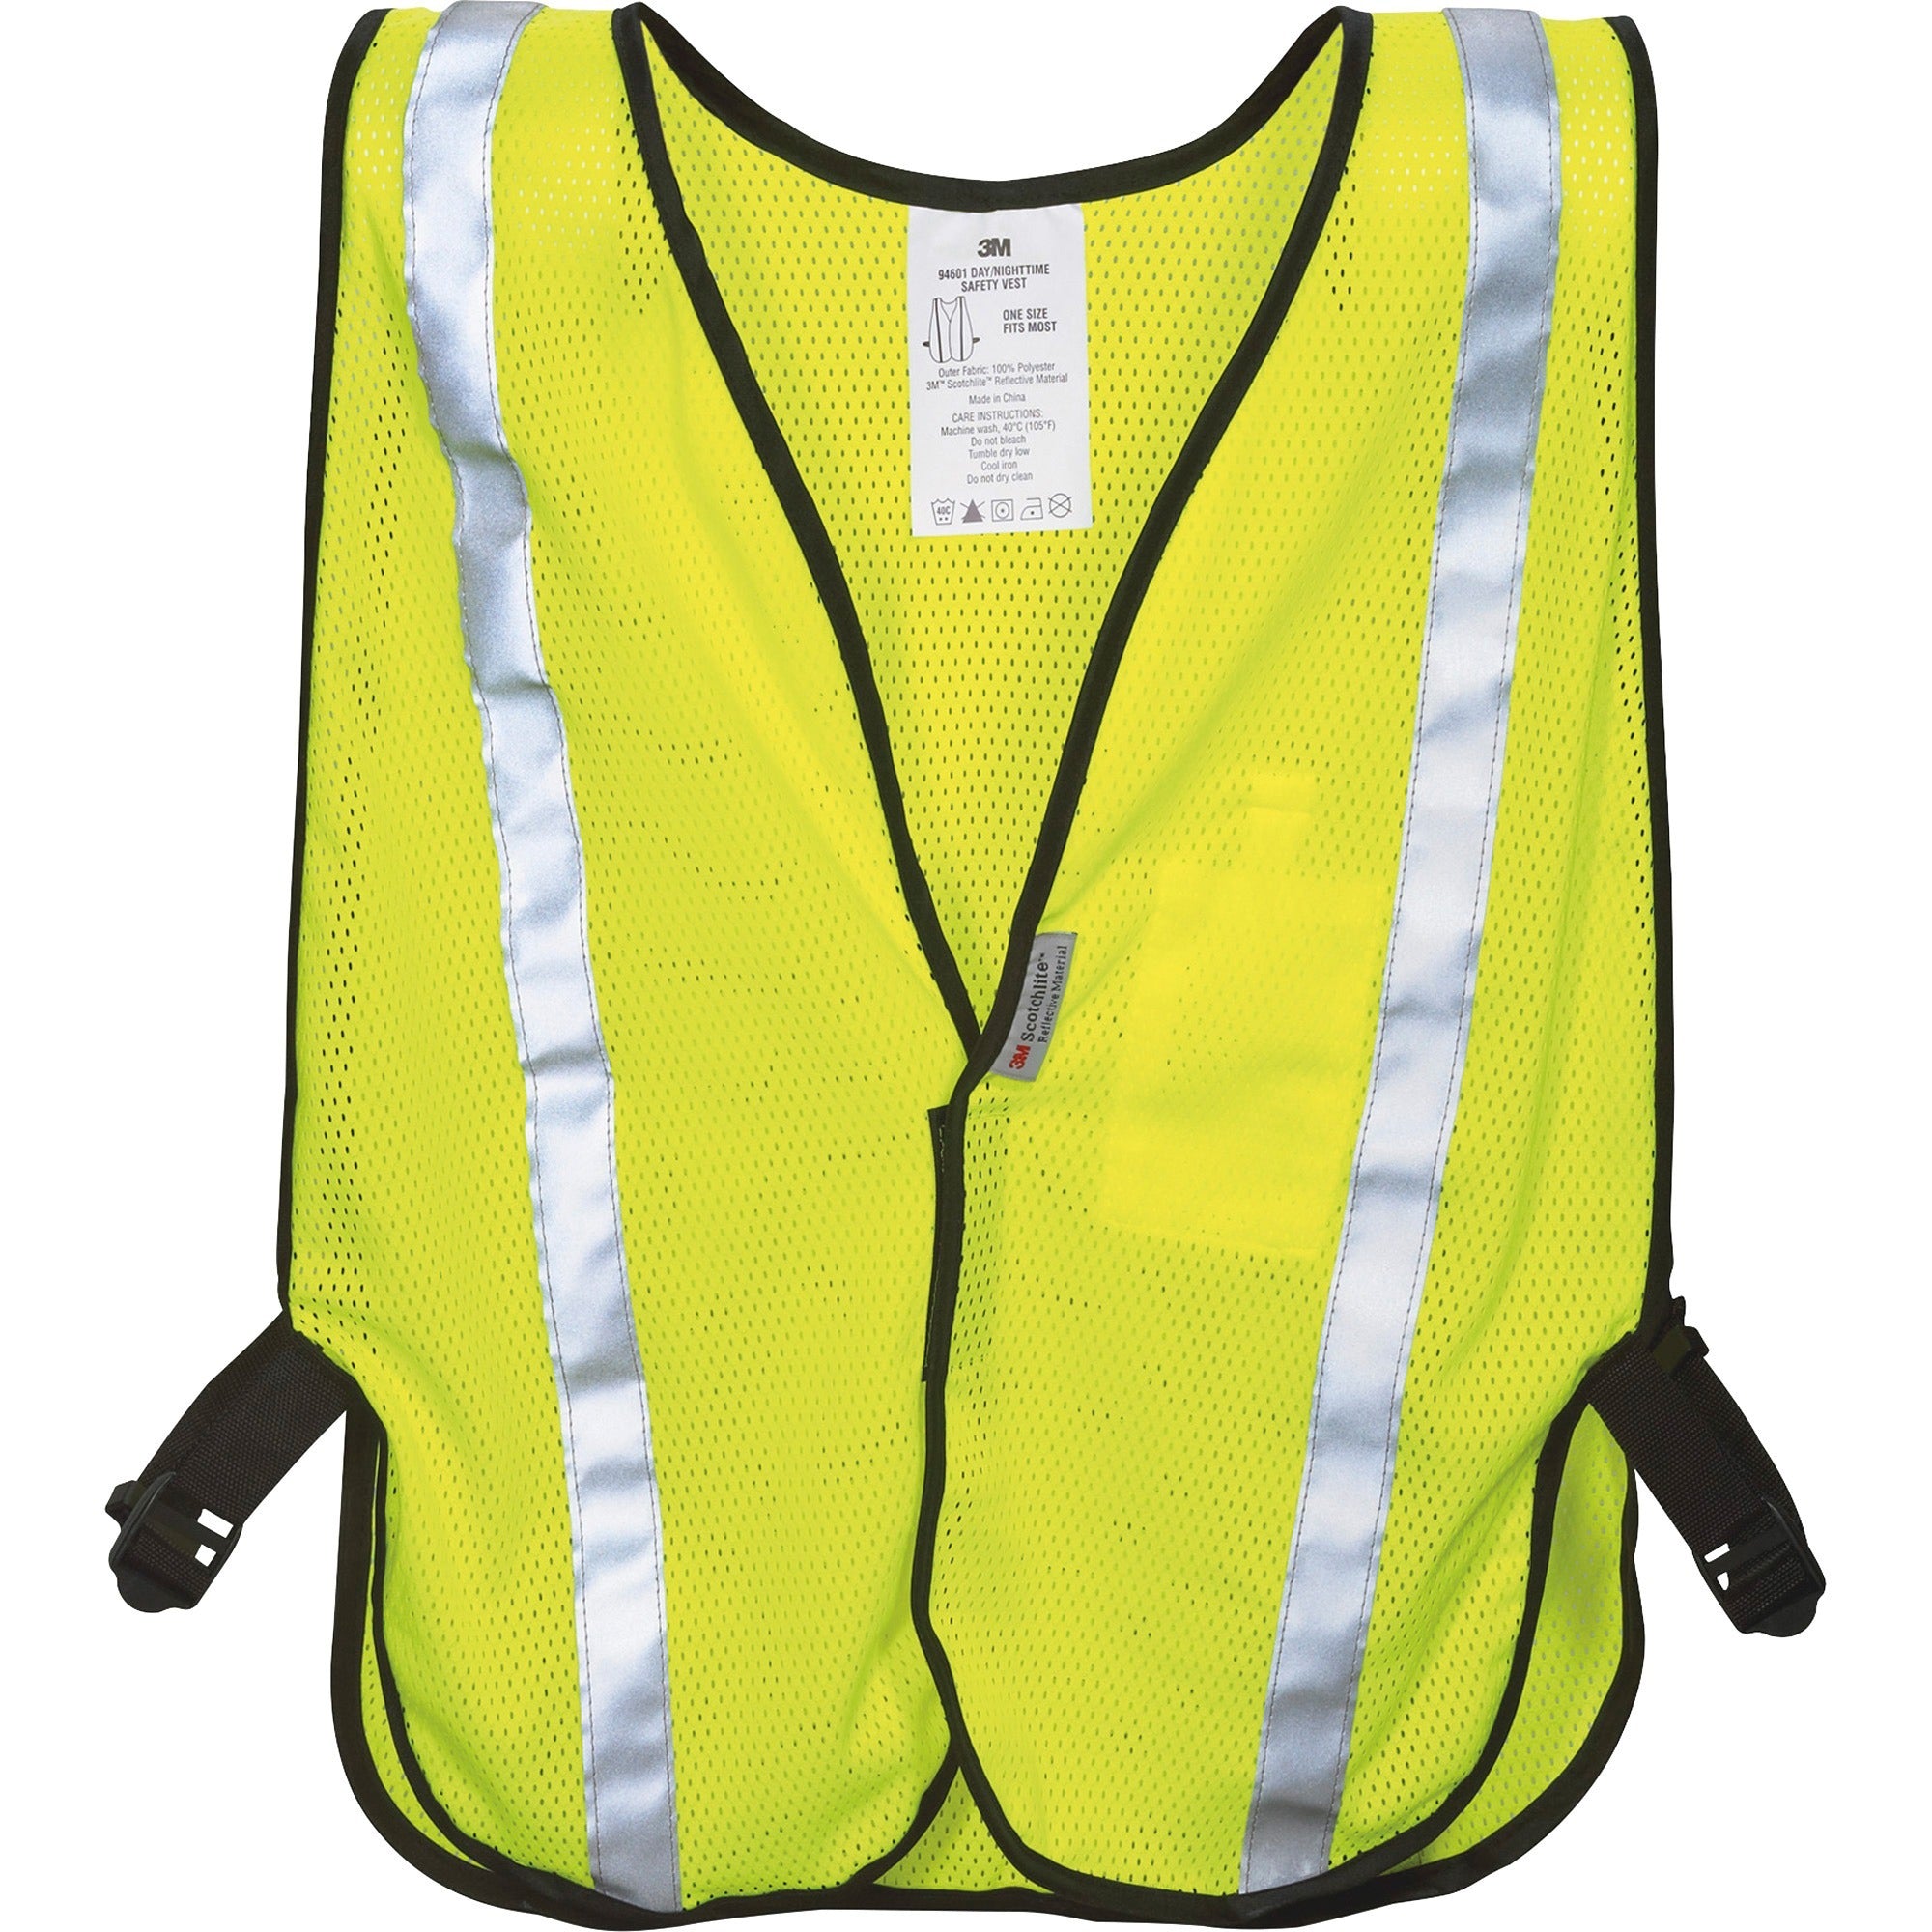 3M Reflective Safety Vest - Visibility Protection - Polyester - Yellow - Lightweight, Reflective, Adjustable Strap, Breathable, Hook & Loop Closure, Pocket - 1 Each - 